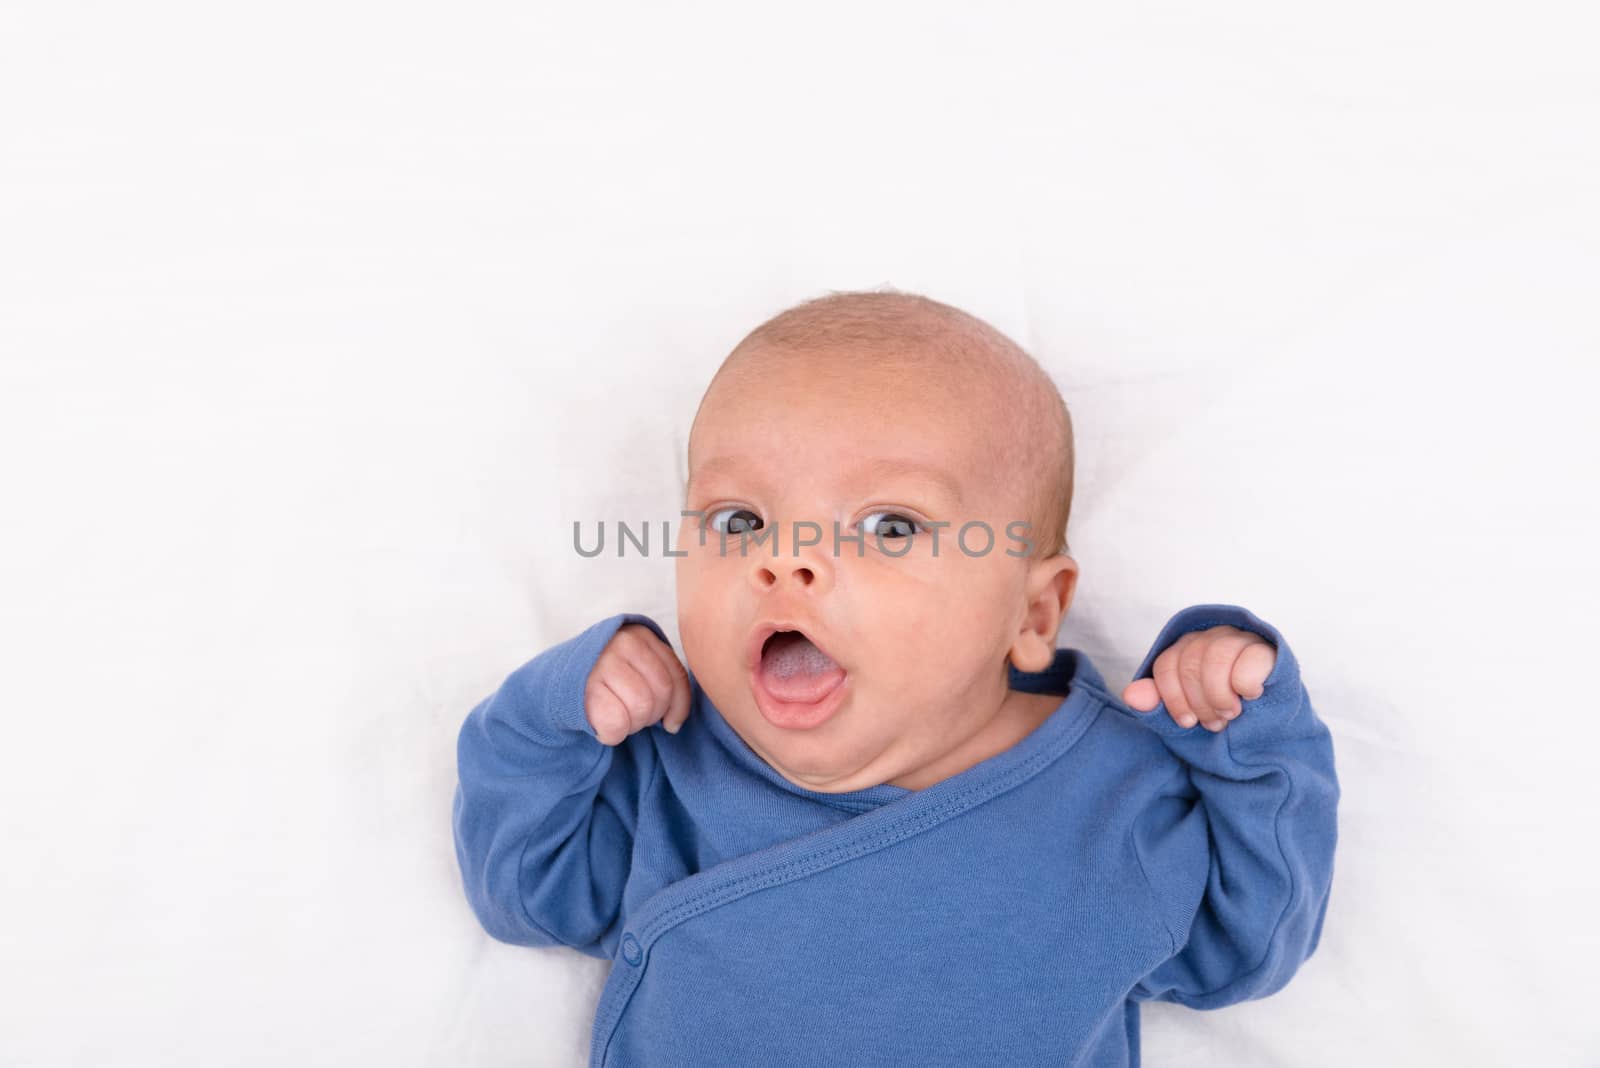 Cute eurasian newborn baby boy wearing a blue infant bodysuit on white sheet and looking at the camera, with copy space